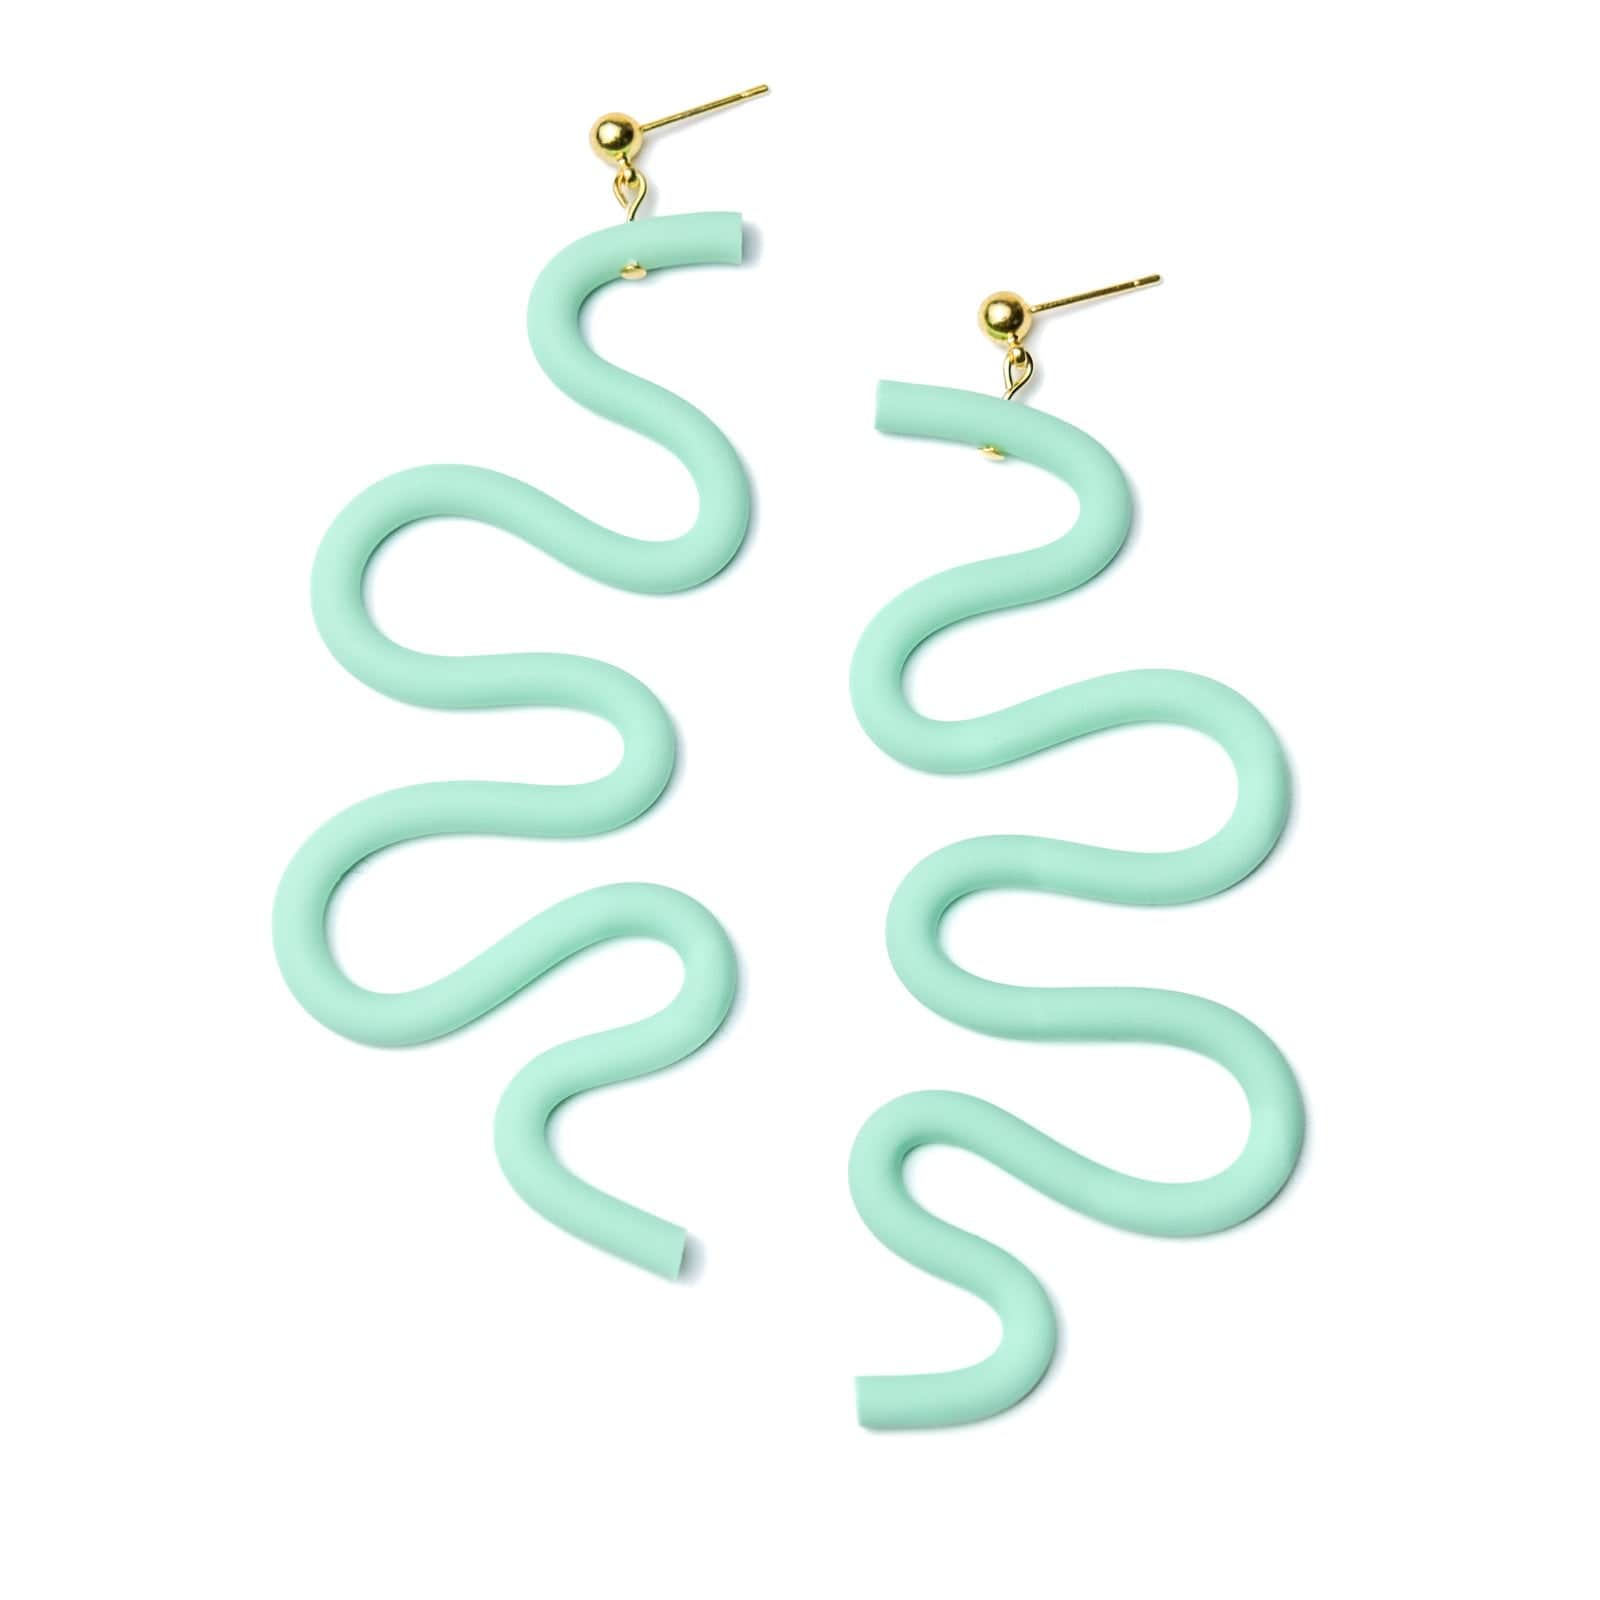 By Chavelli Women's Small Tube Squiggles Dangly Earrings In Mint Green